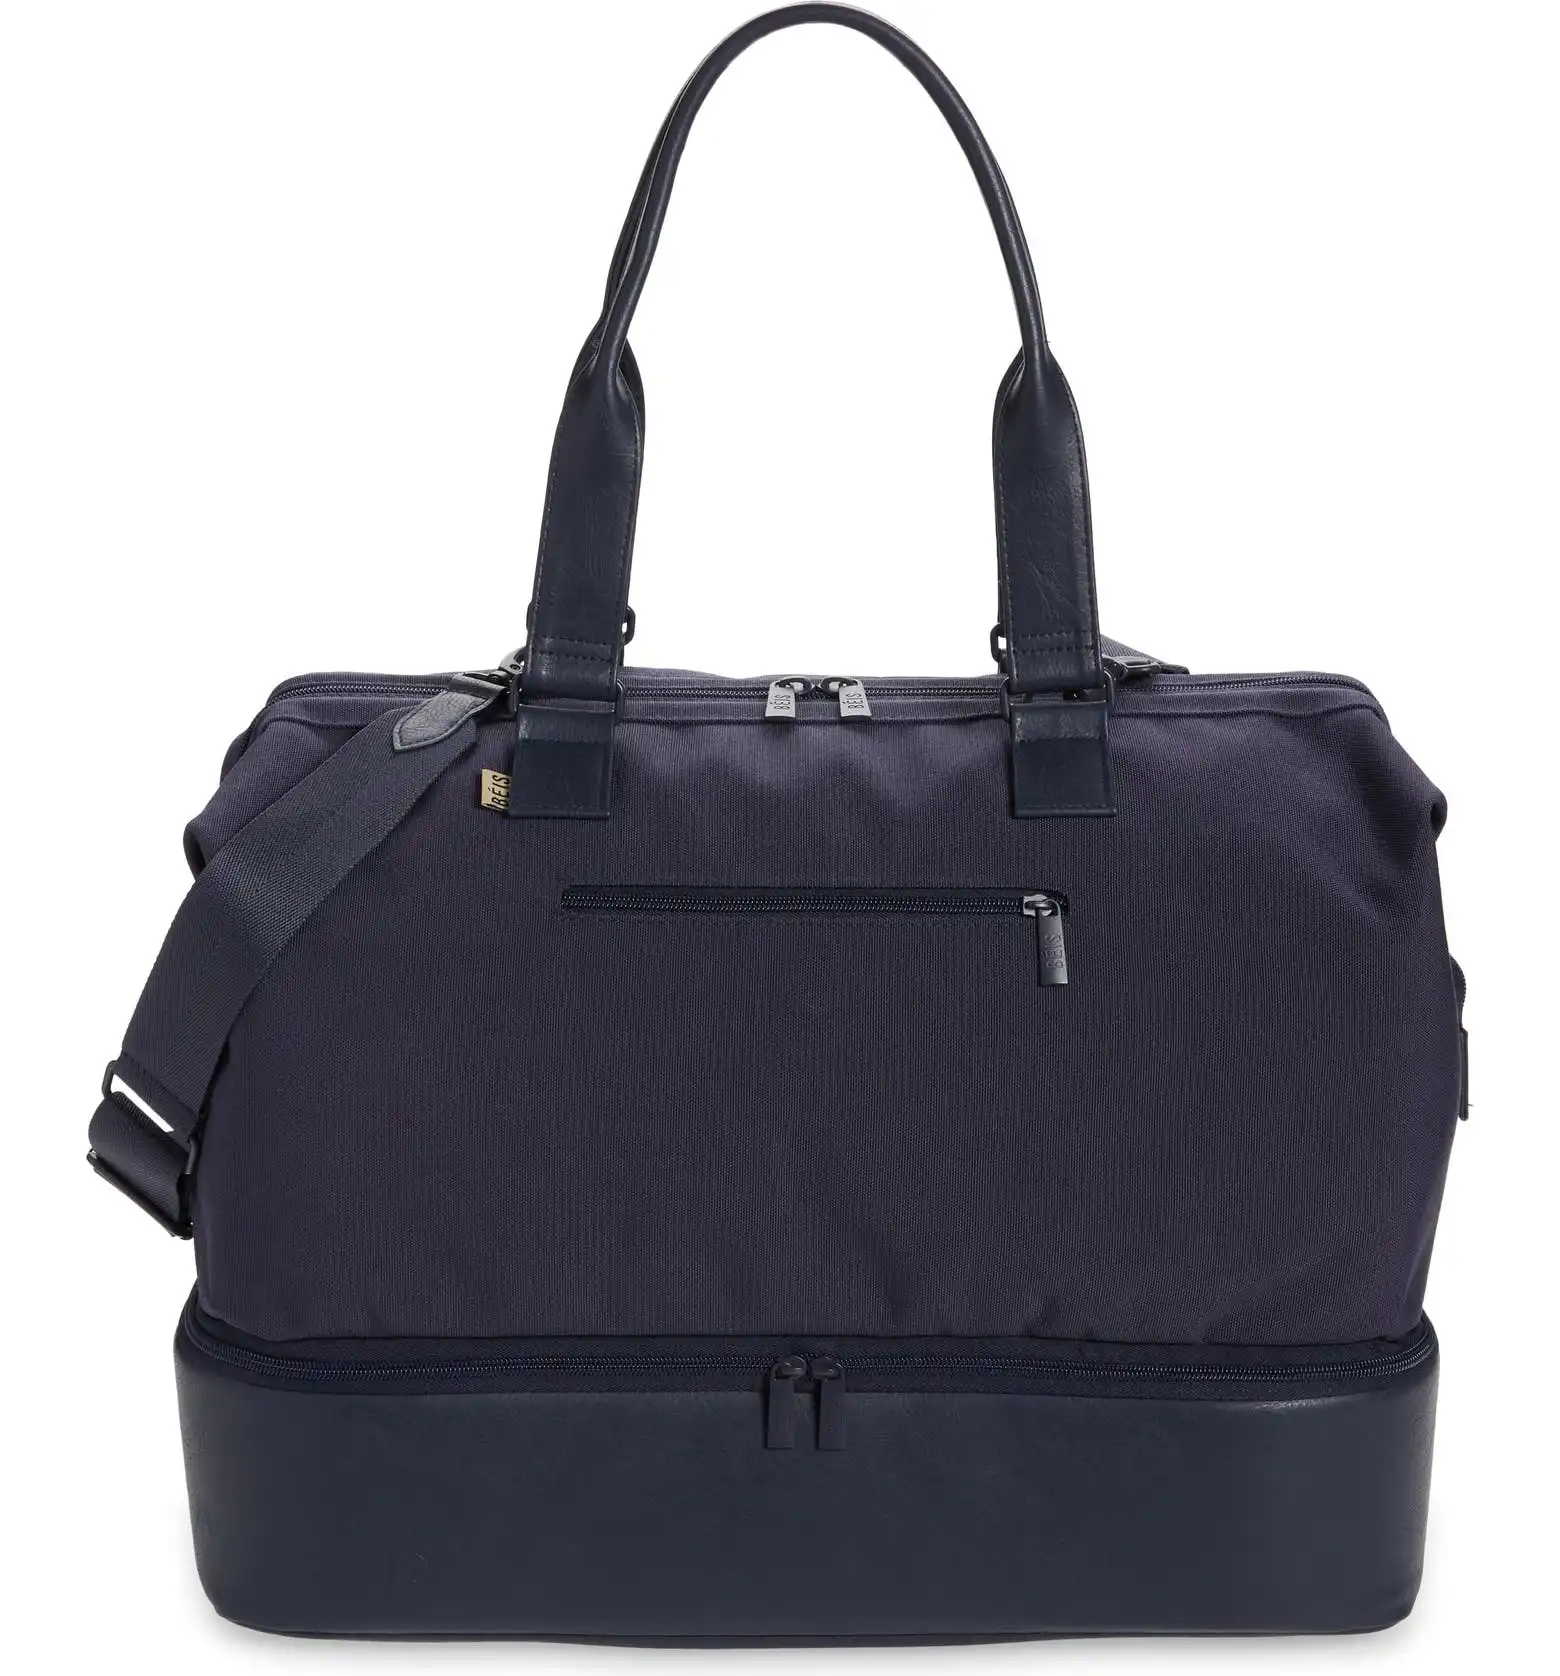 Beis Travel Travel Tote in Grey at Nordstrom